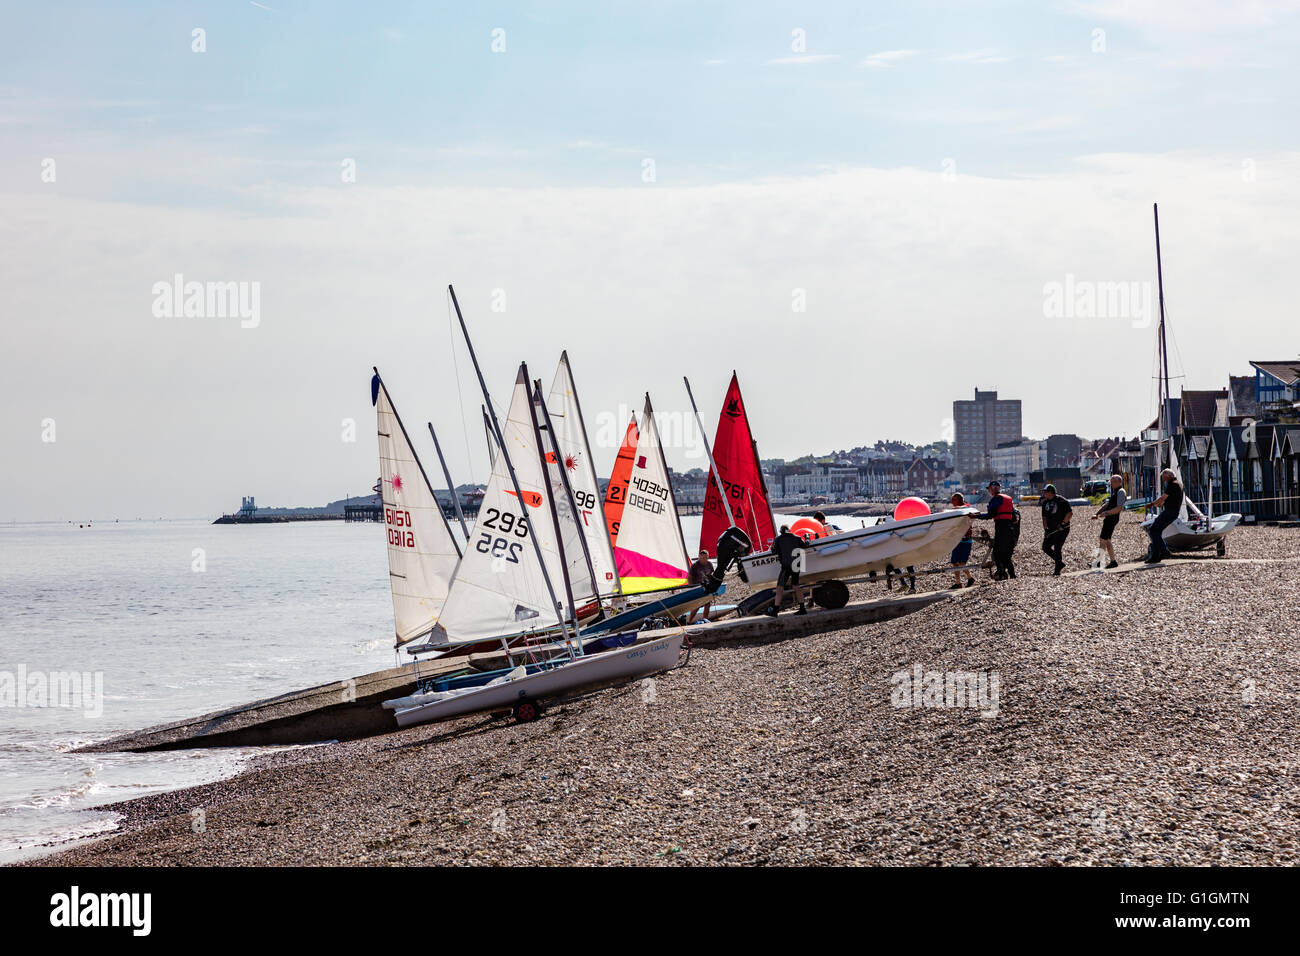 Dinghy sailors prepare for a morning race on the beach at Hampton, Herne Bay, Kent, UK Stock Photo